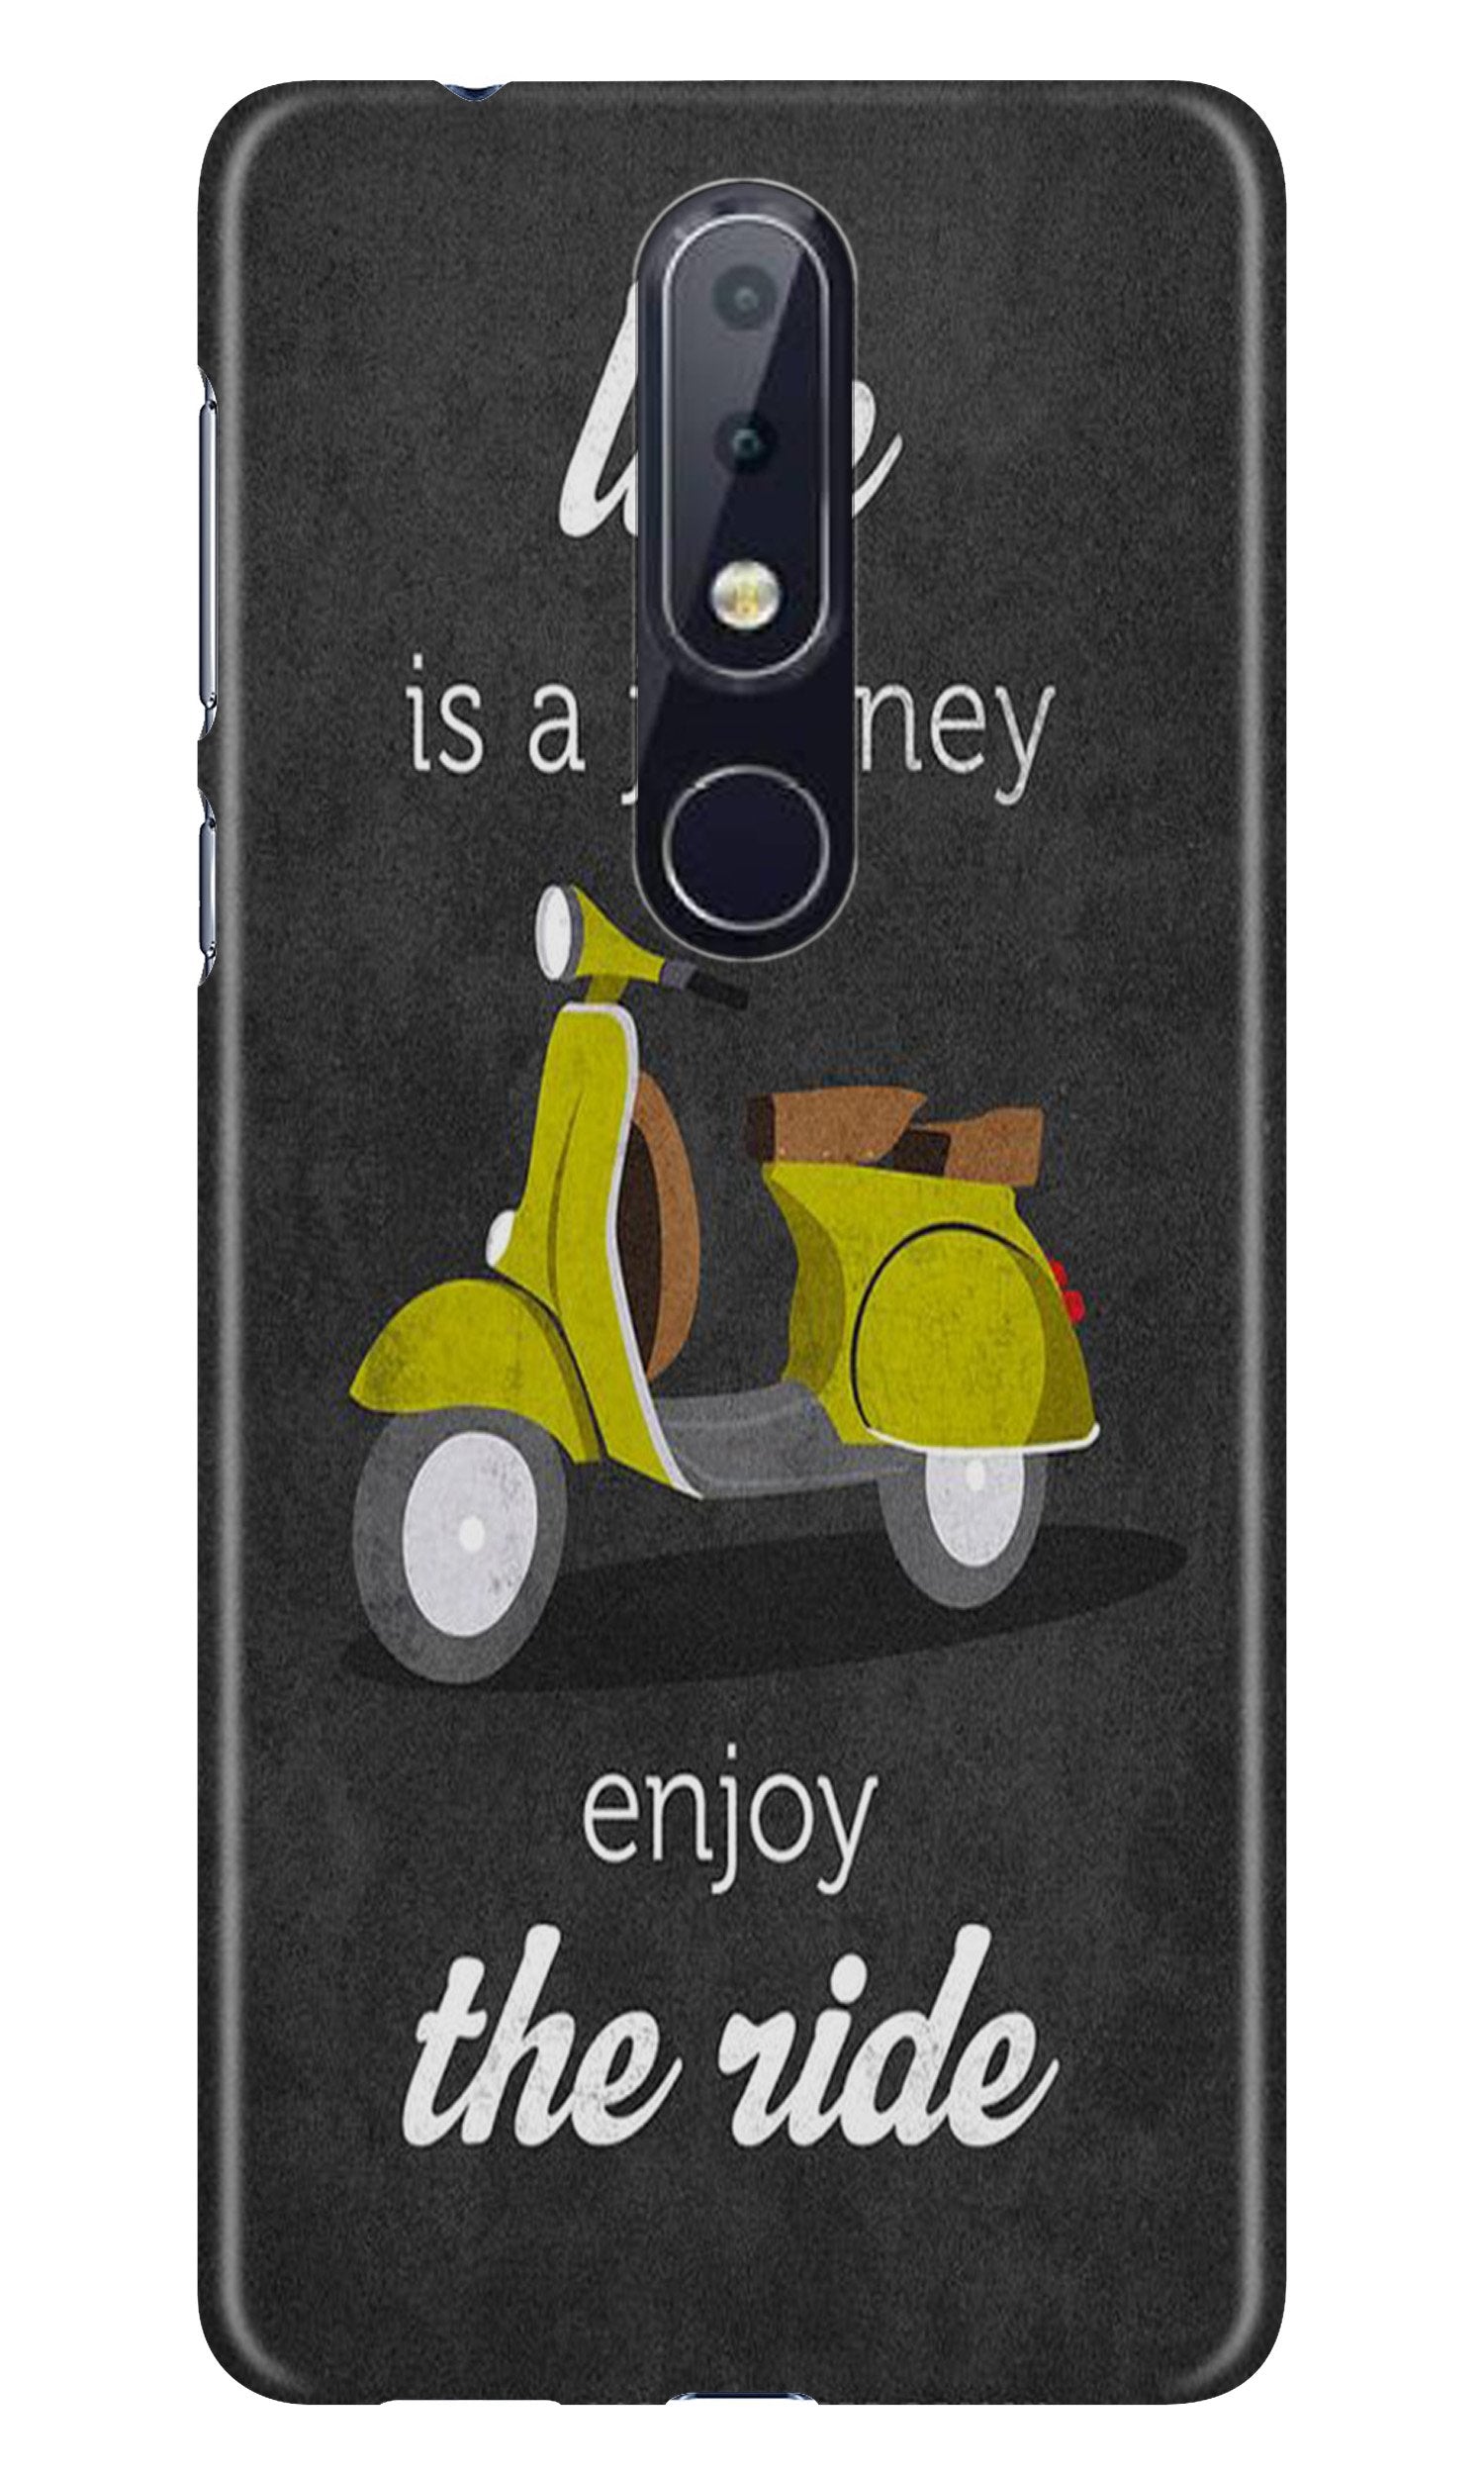 Life is a Journey Case for Nokia 7.1 (Design No. 261)